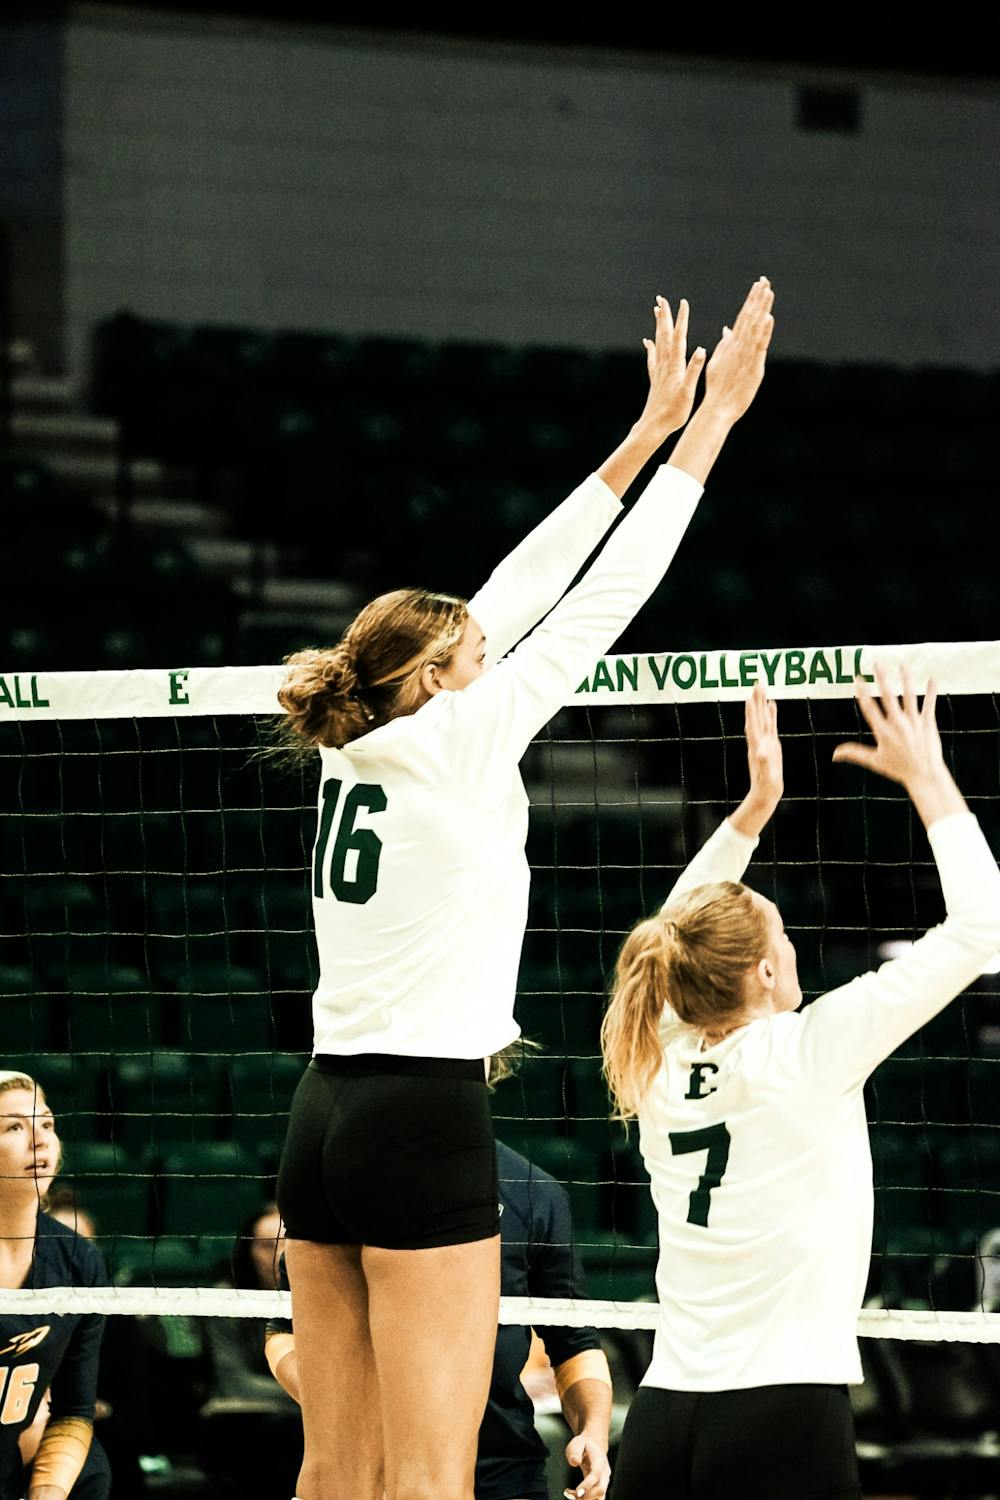 Eastern Michigan University upsets Bowling Green State University 3-2 in Mid-American Conference showdown